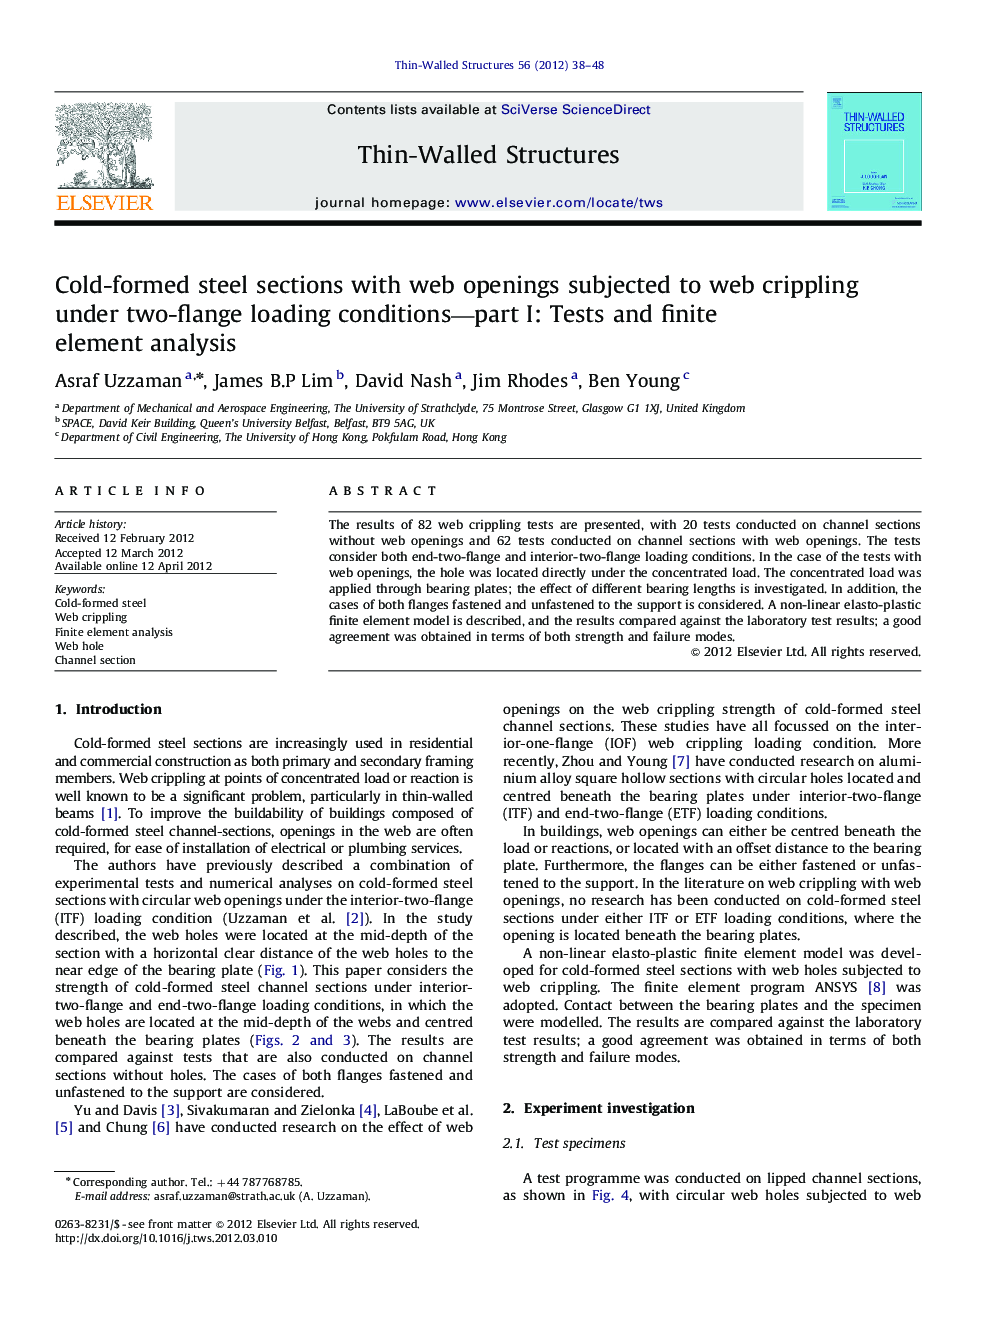 Cold-formed steel sections with web openings subjected to web crippling under two-flange loading conditions—part I: Tests and finite element analysis